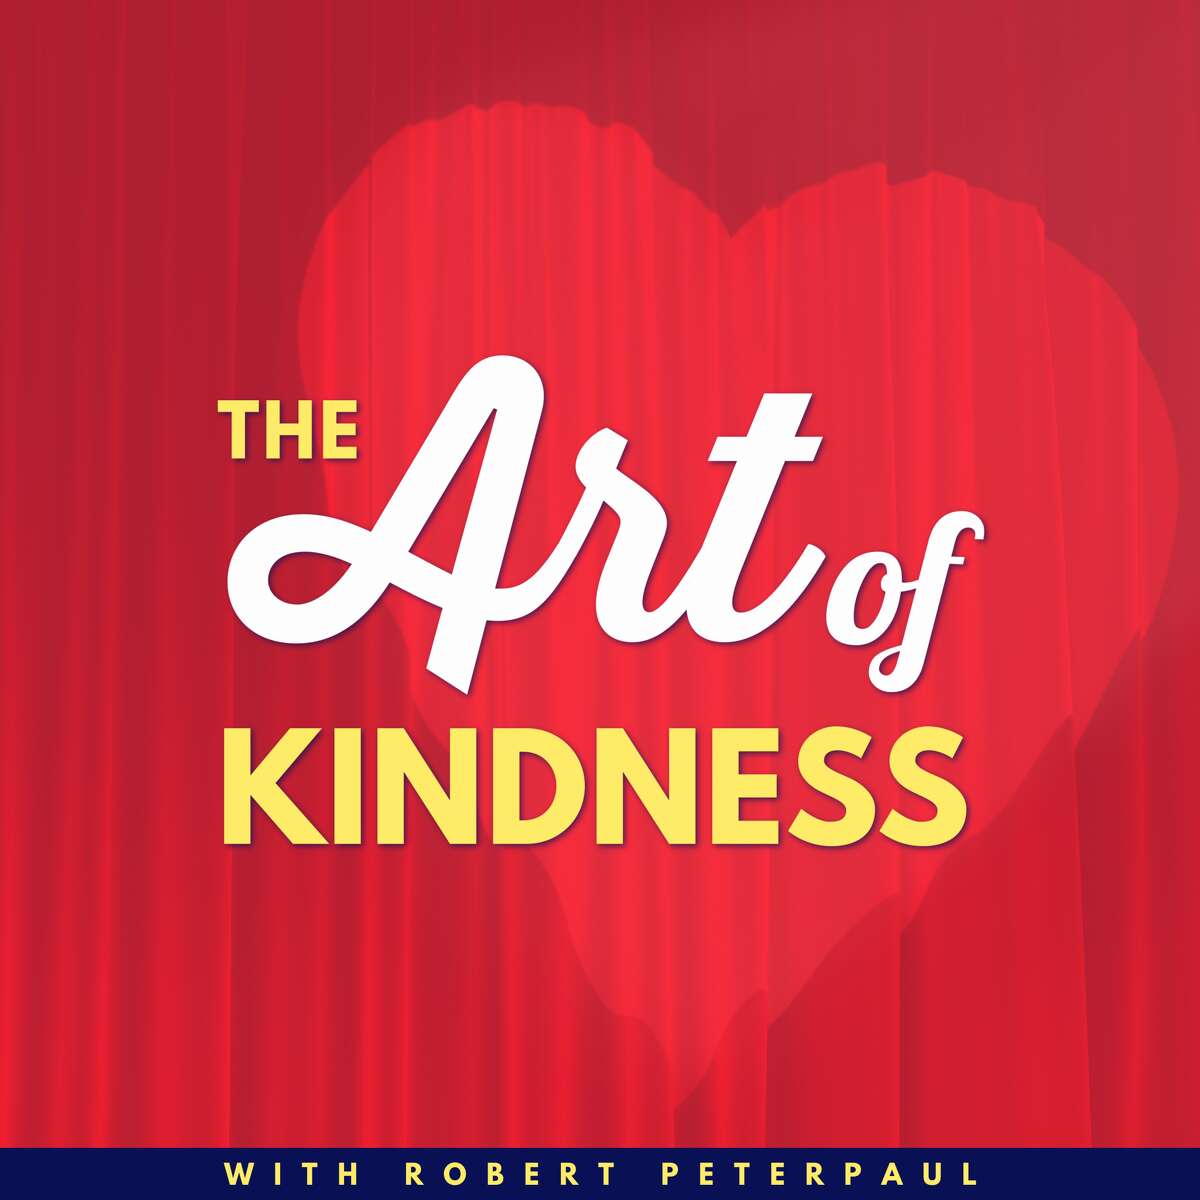 With an array of celebrity guests, host Robert Peterpaul aims to discover what makes his guests so kind and how they can inform his ever-changing definition of kindness.